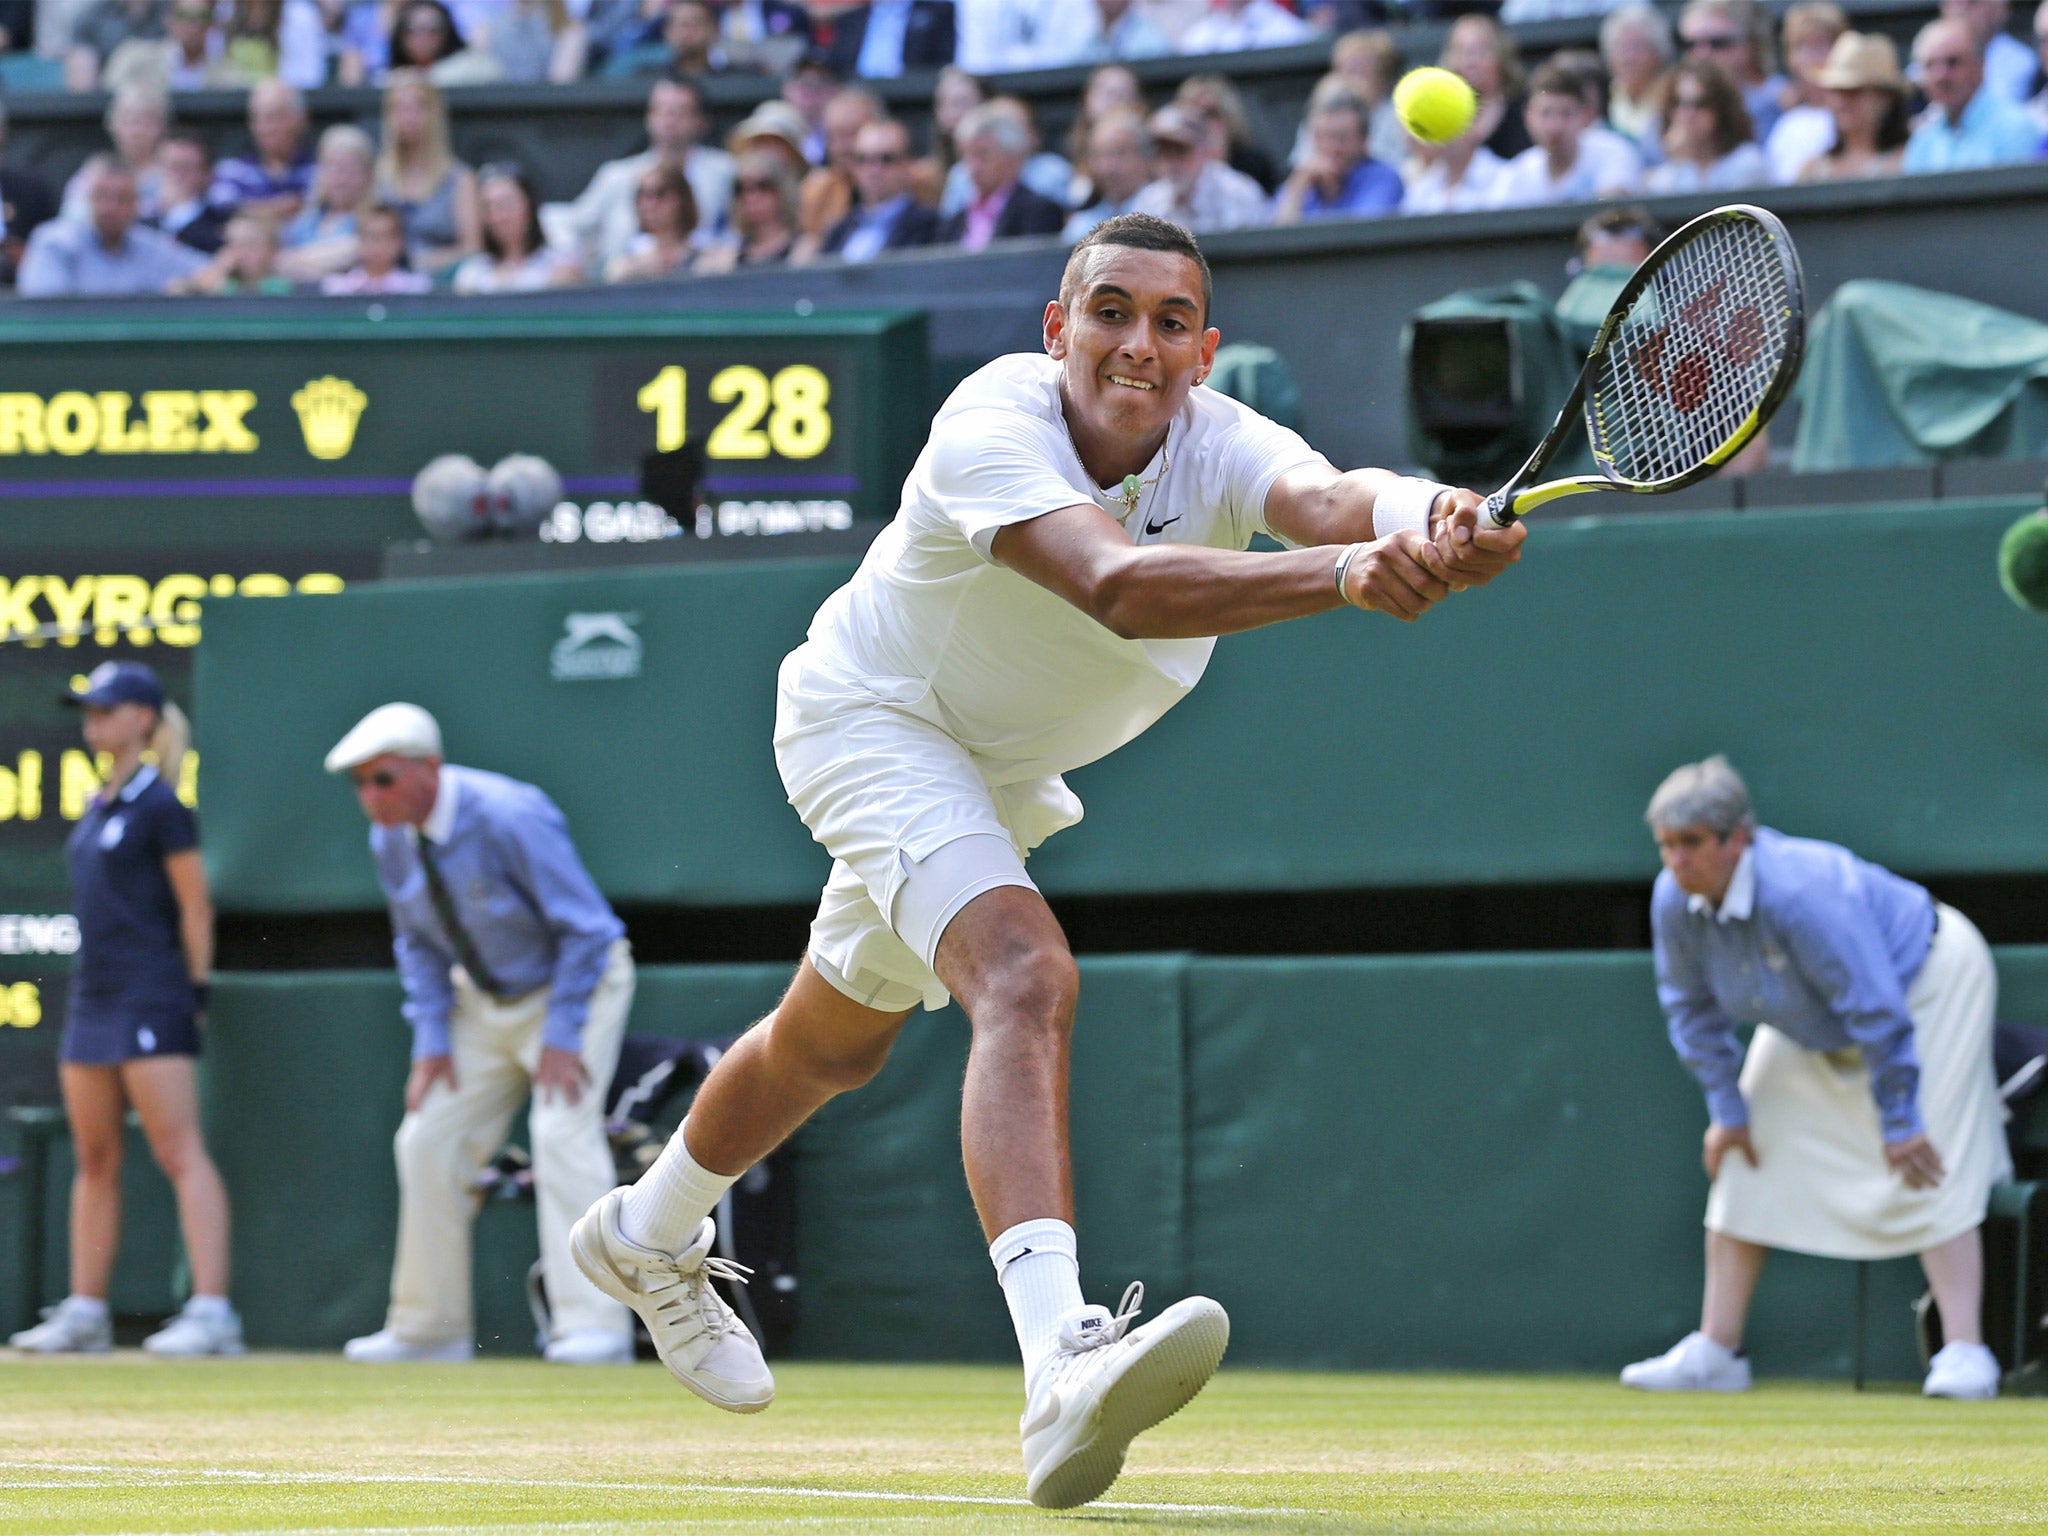 Nick Kyrgios stretches to play a return to Rafael Nadal in his remarkable upset victory